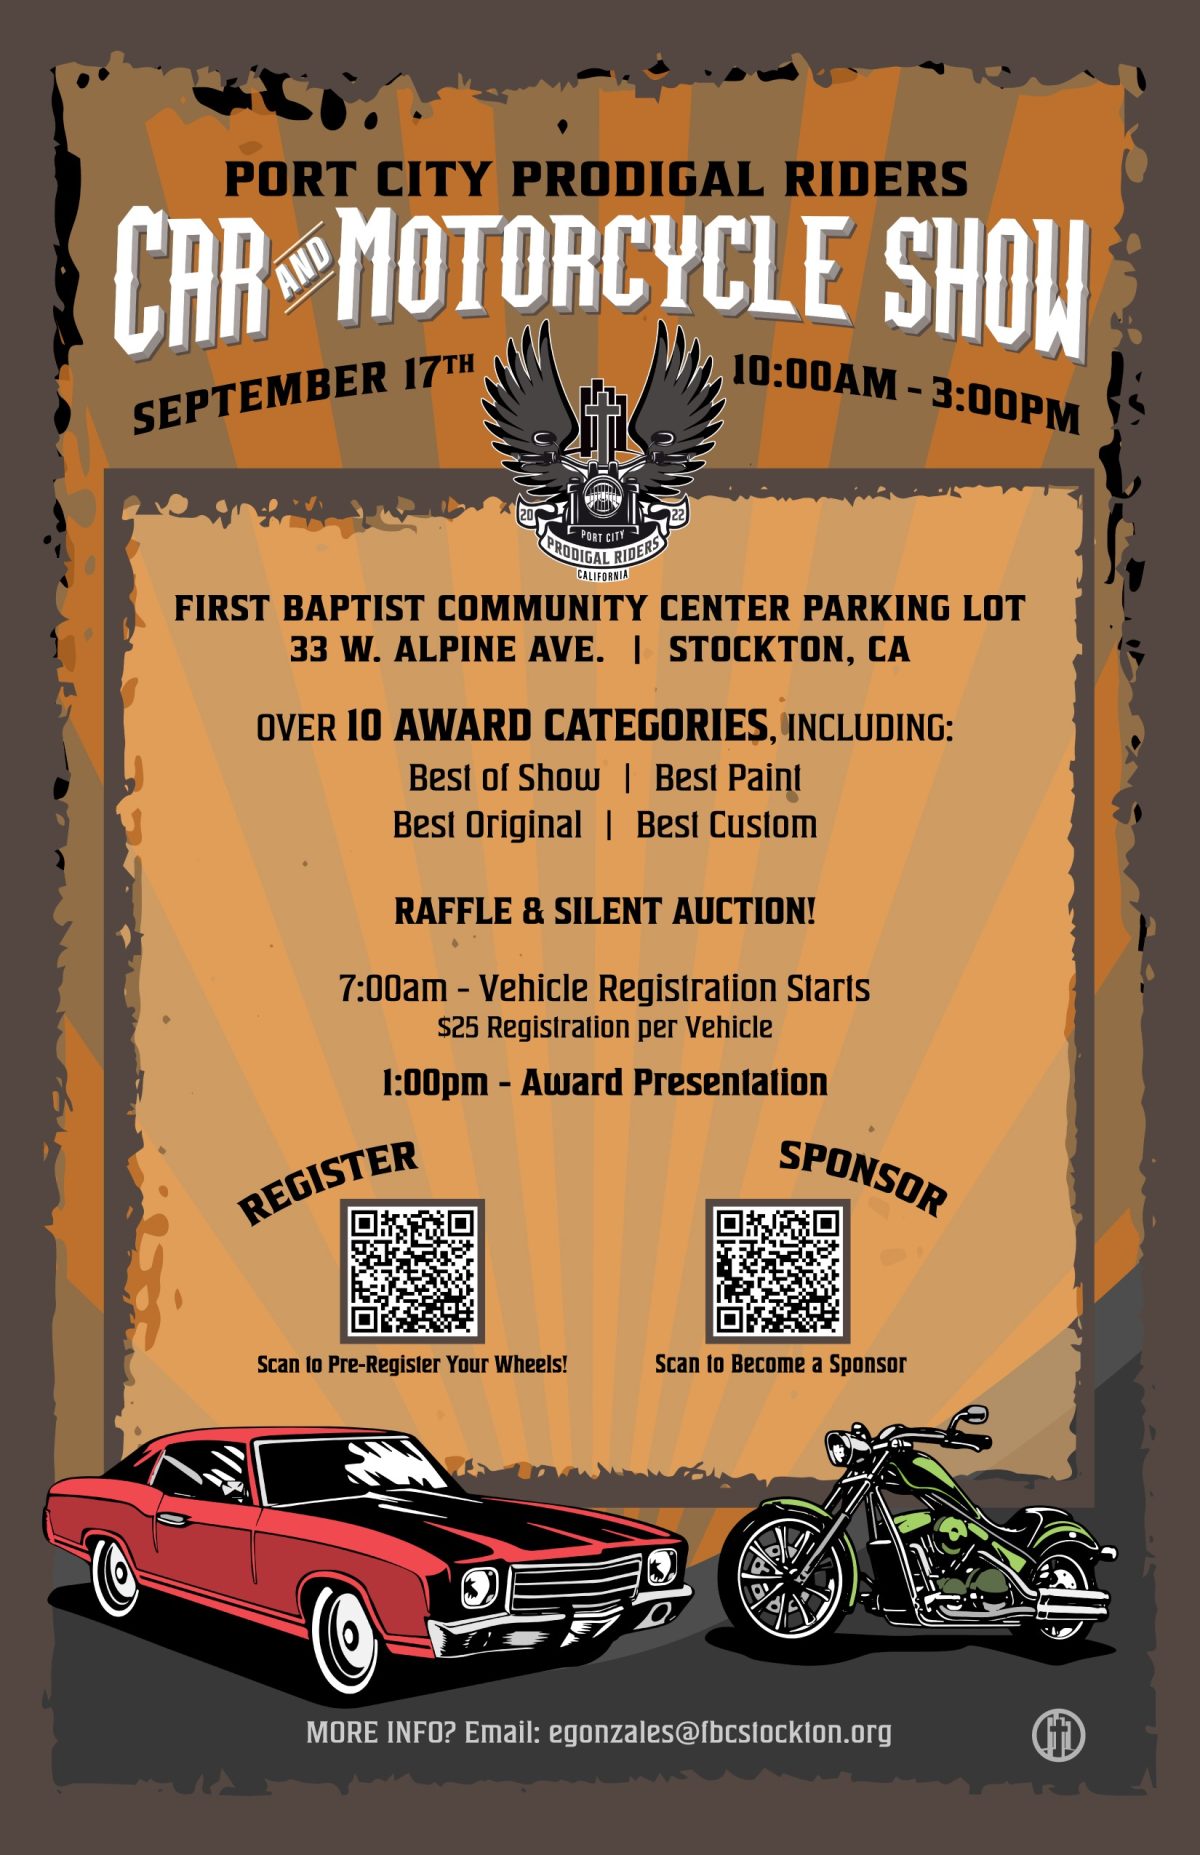 Port City Prodigal Riders Car and Motorcycle Show